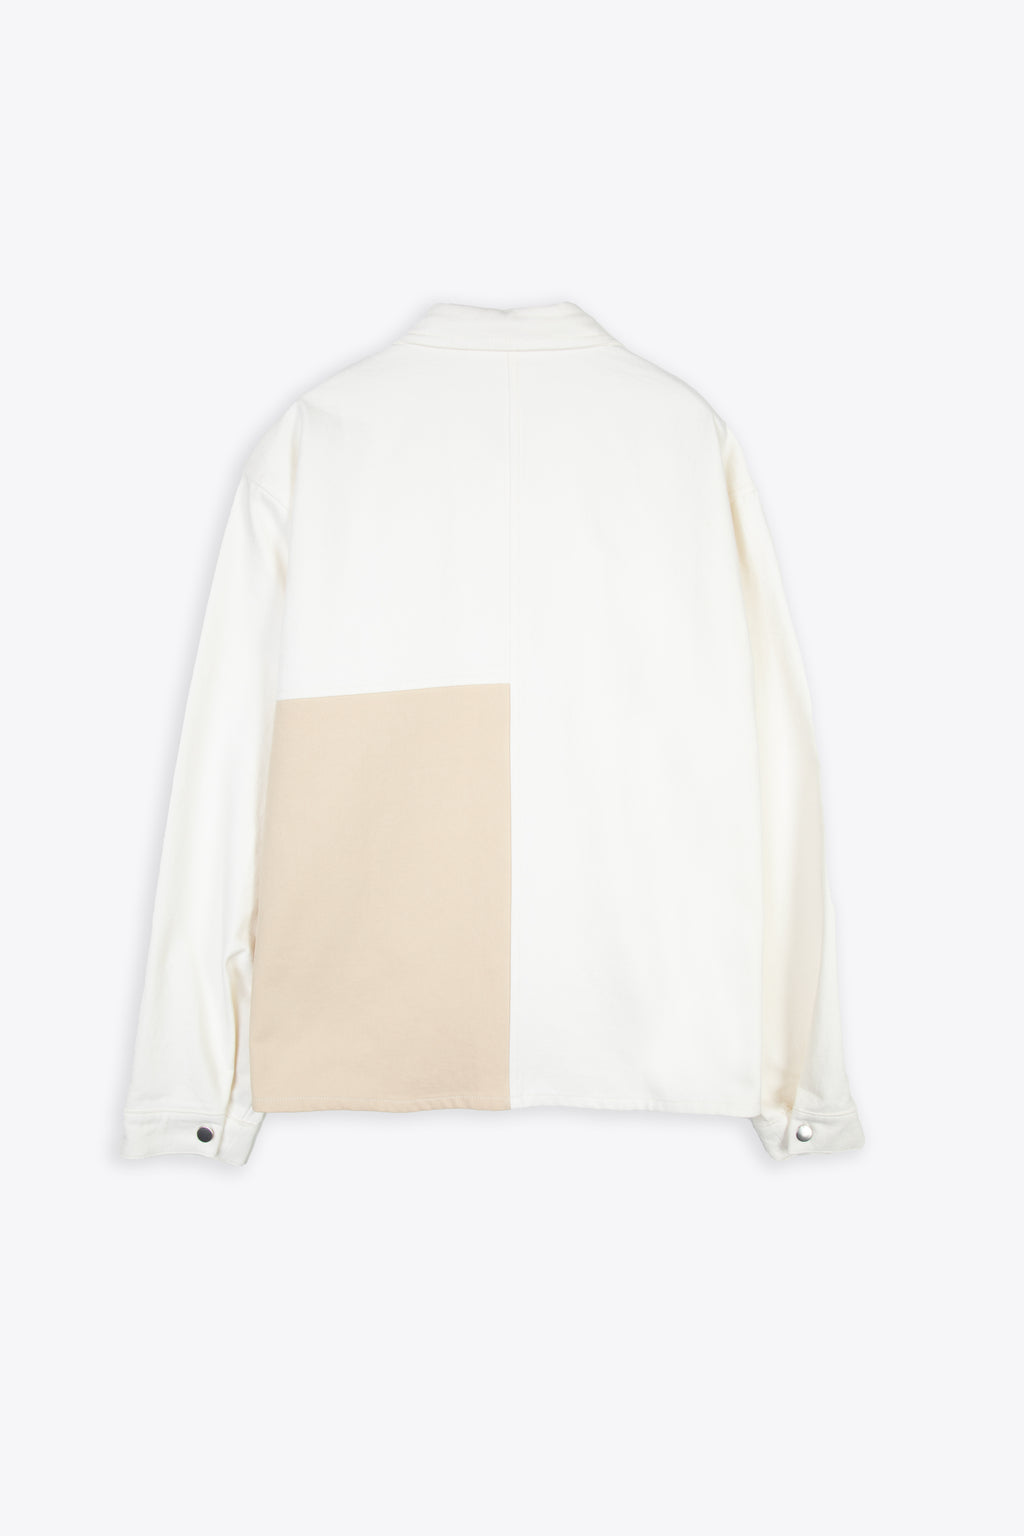 alt-image__Off-white-and-beige-colorblock-overshirt---Block-shirt